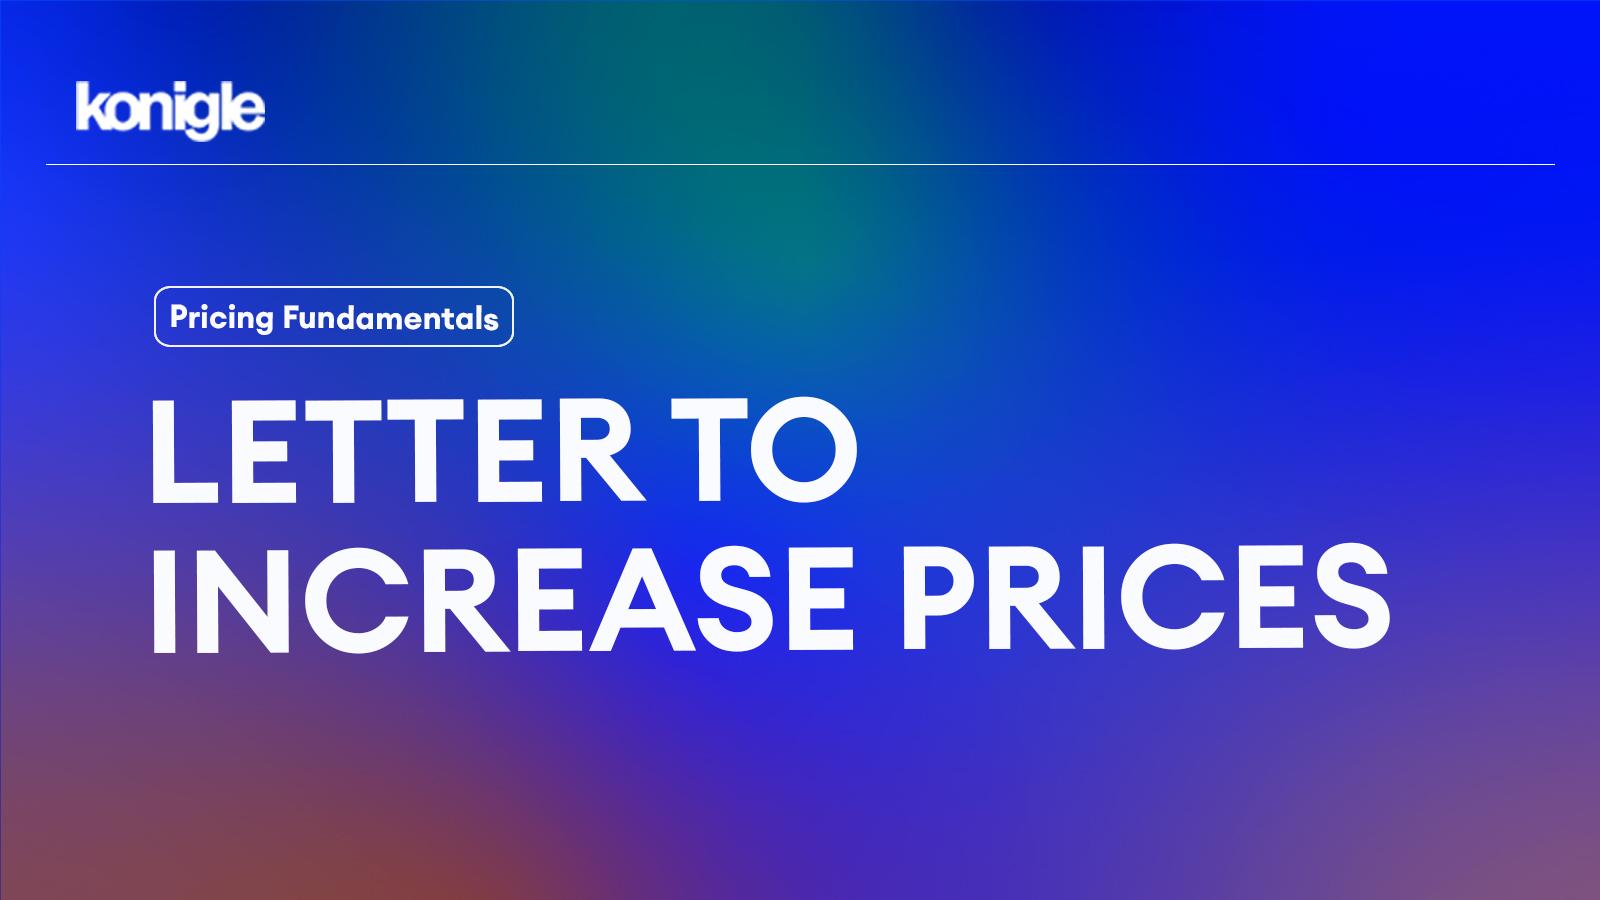 How to use a letter to increase prices and increase sales